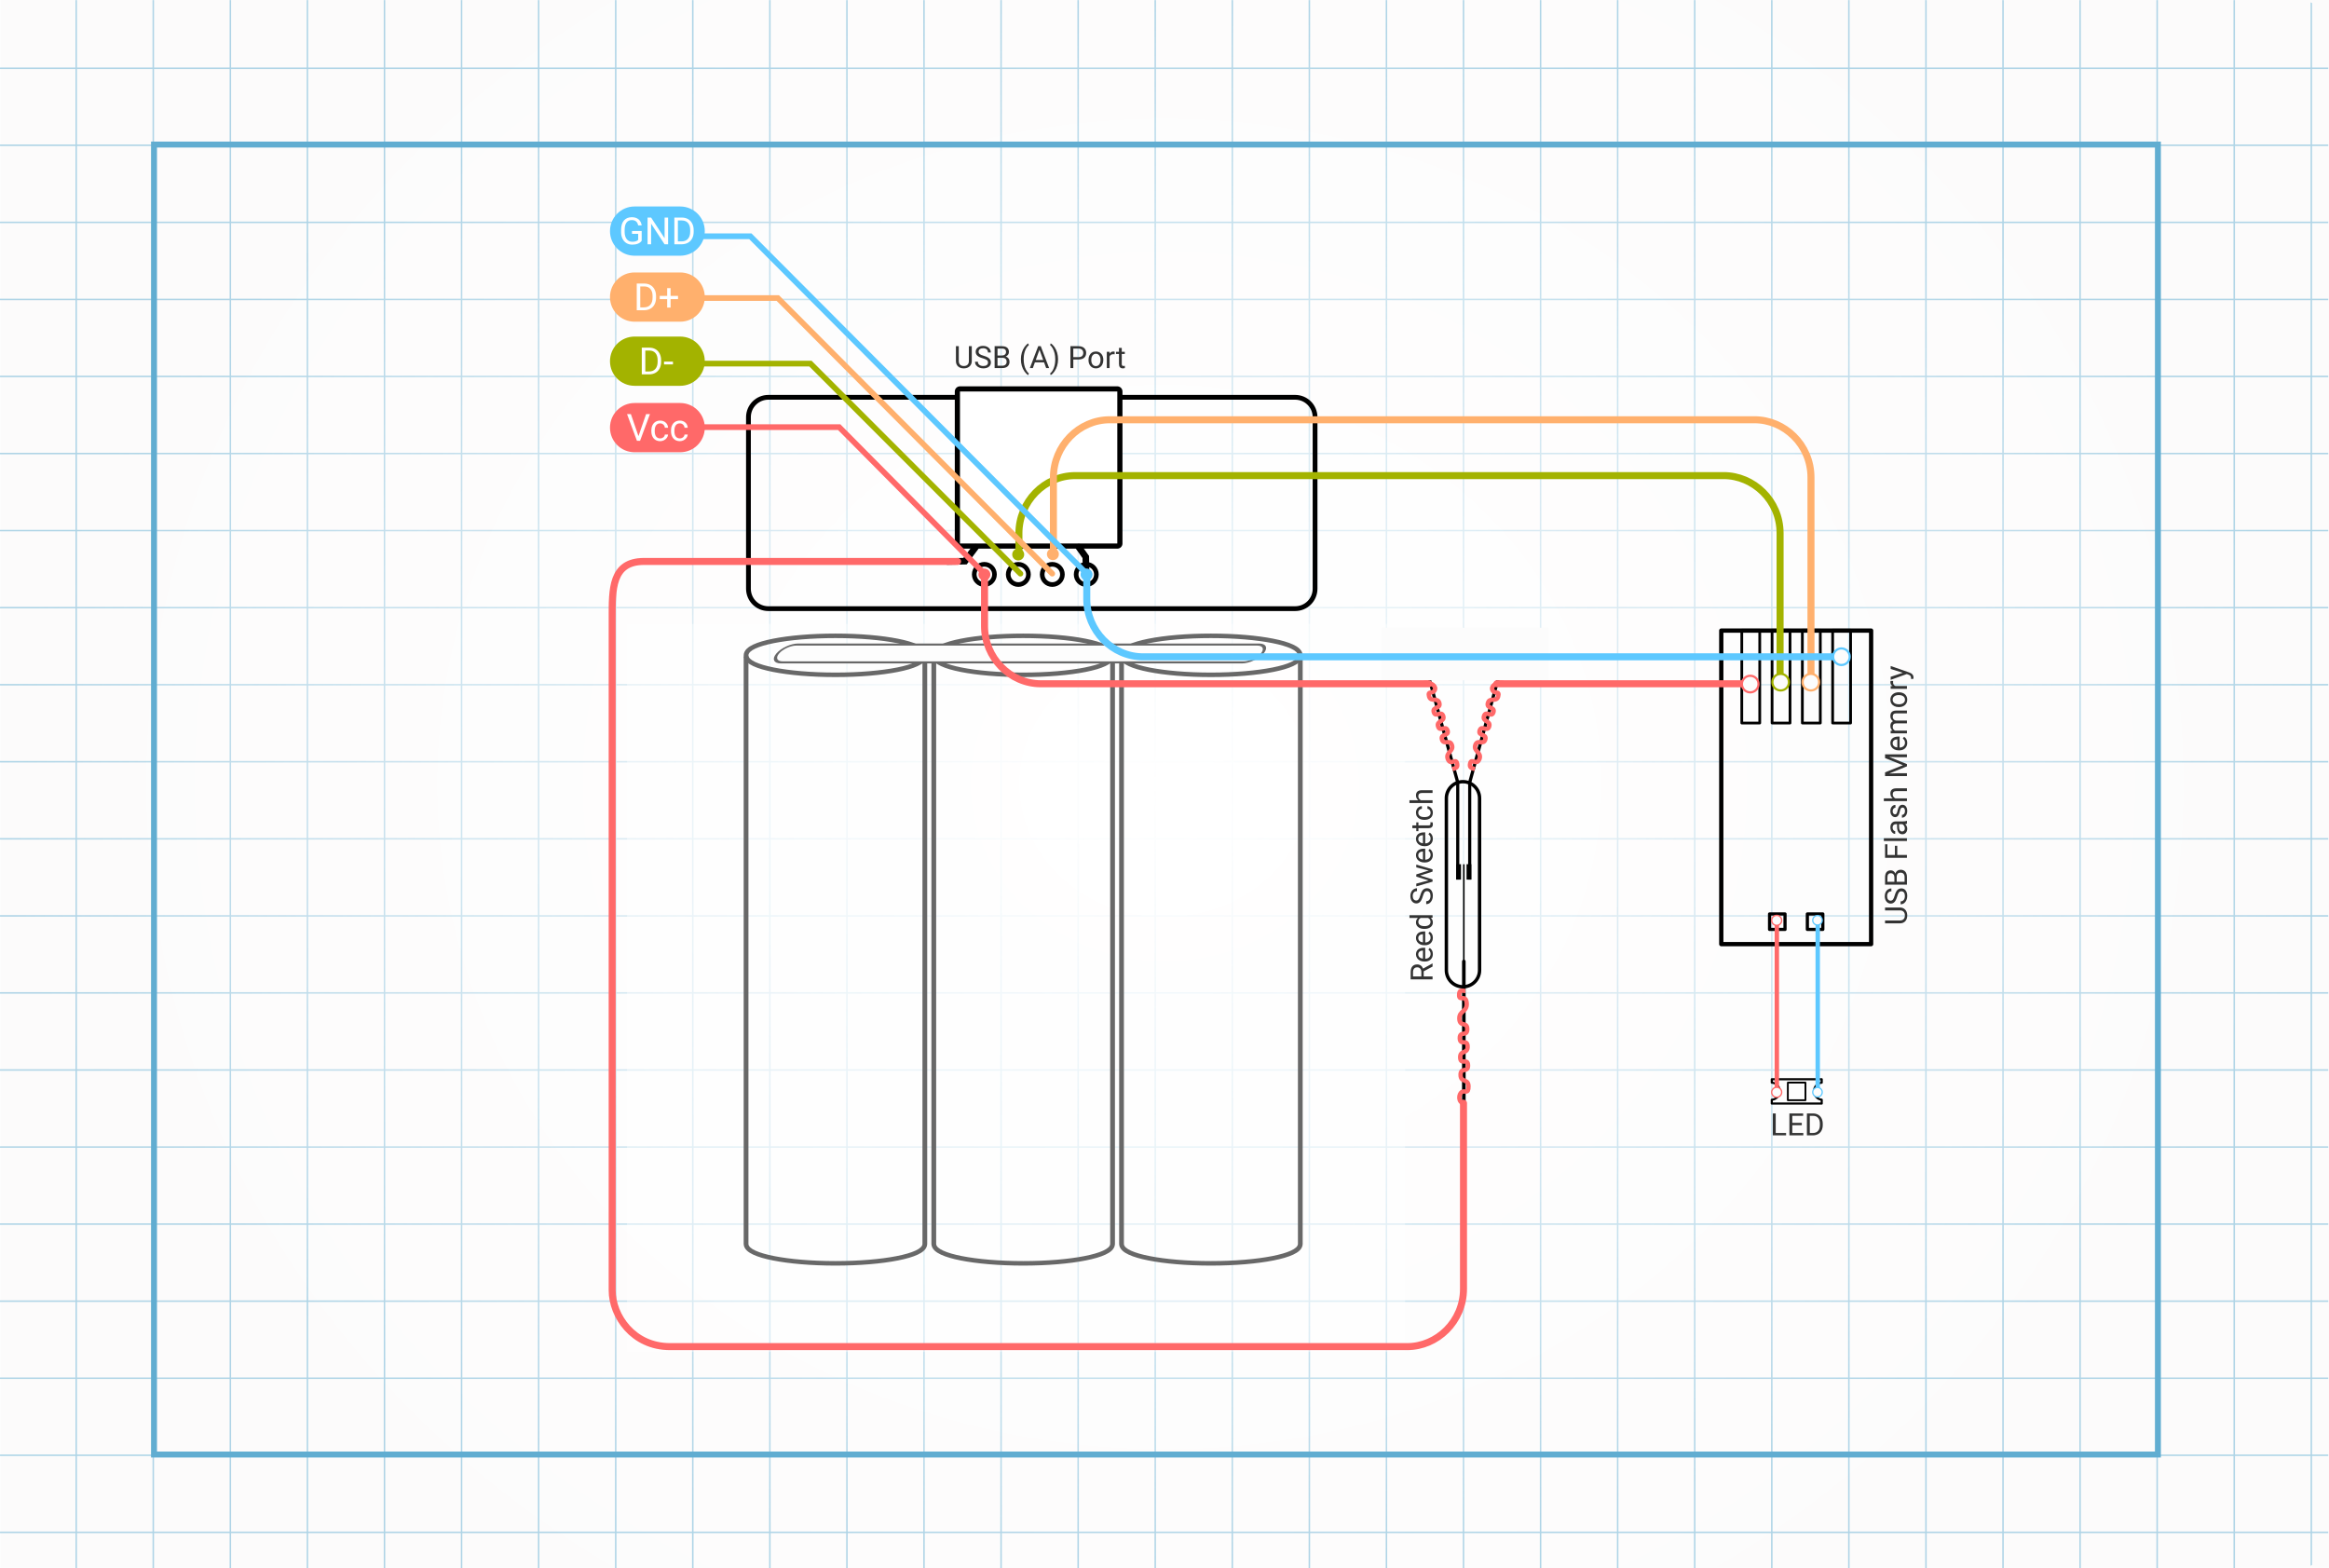 schematic Hidden USB Flash Drive - Self Made Memory Storage Inside a Power Bank Barely Painted.png